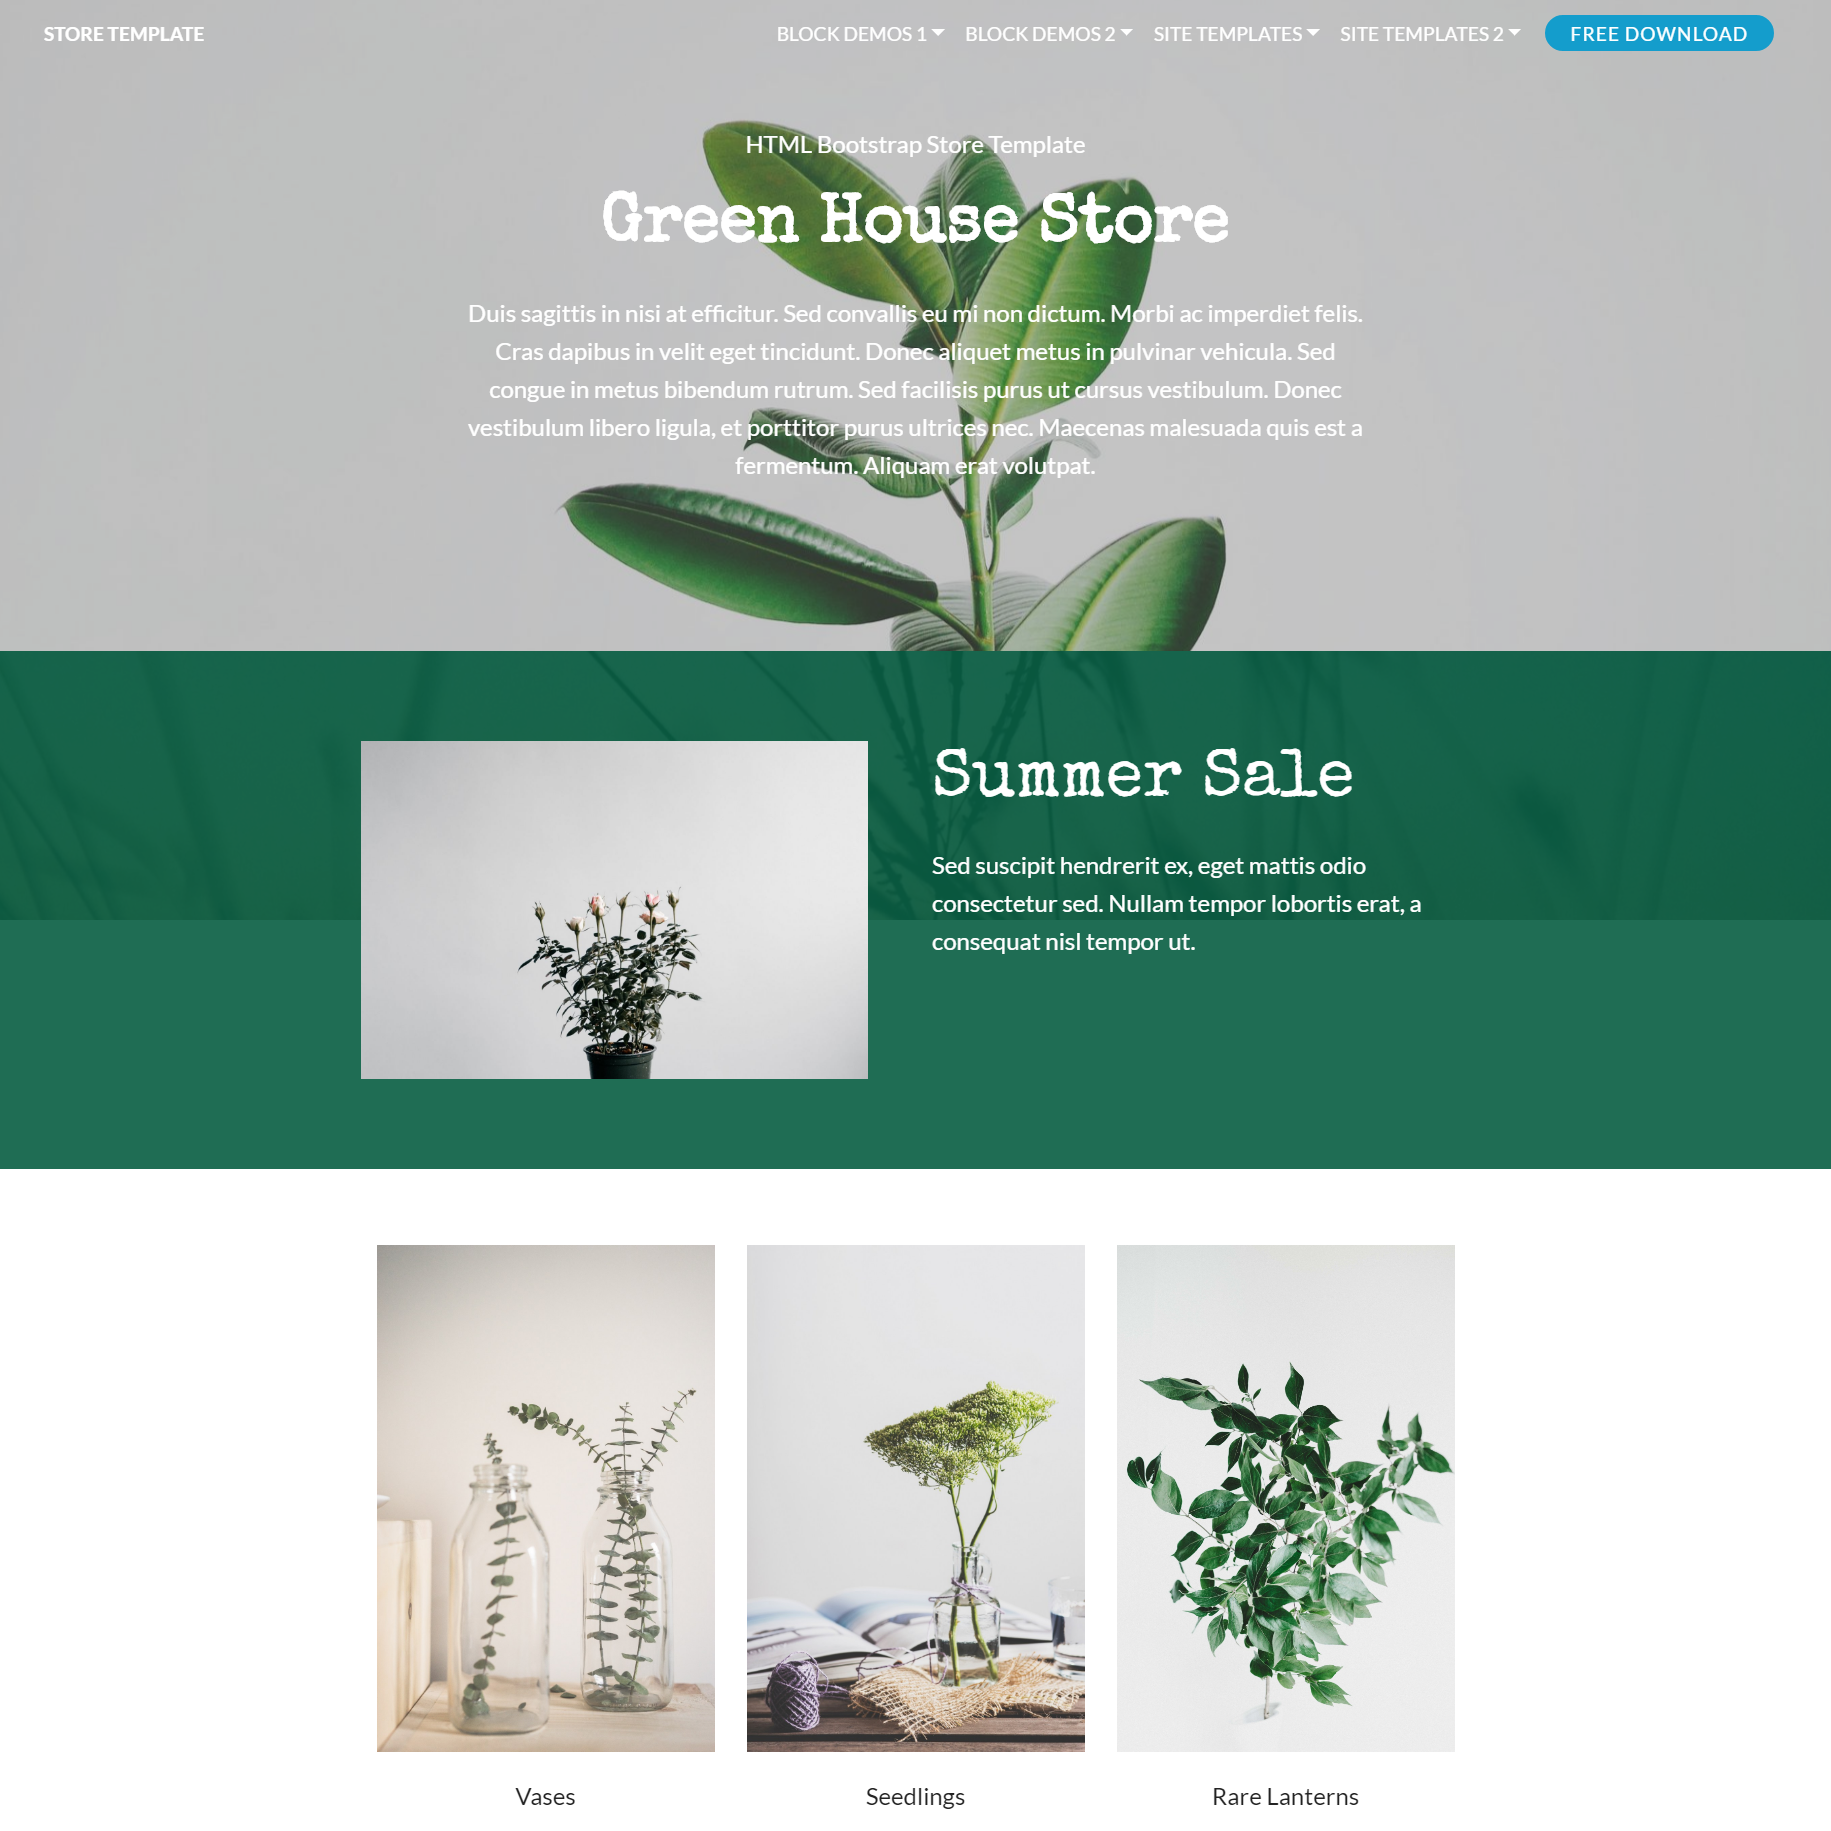 Responsive Bootstrap Store Templates